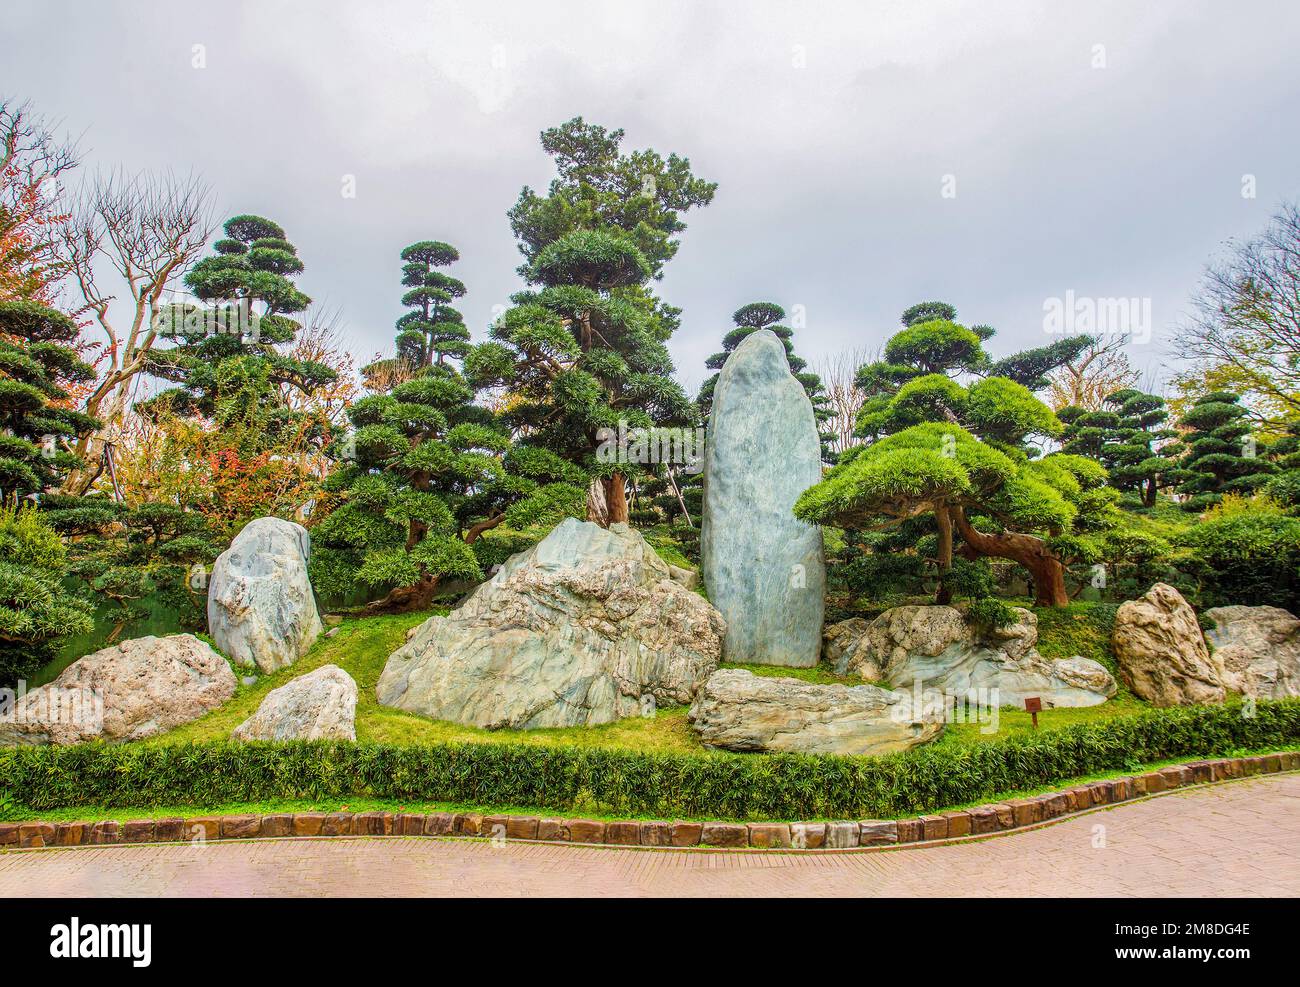 Superb View of the cliffs in Nan Lian Park with idyllic topiary podocarpus and pine trees. Entrance to the garden шn tropical Hong Kong. Interesting l Stock Photo